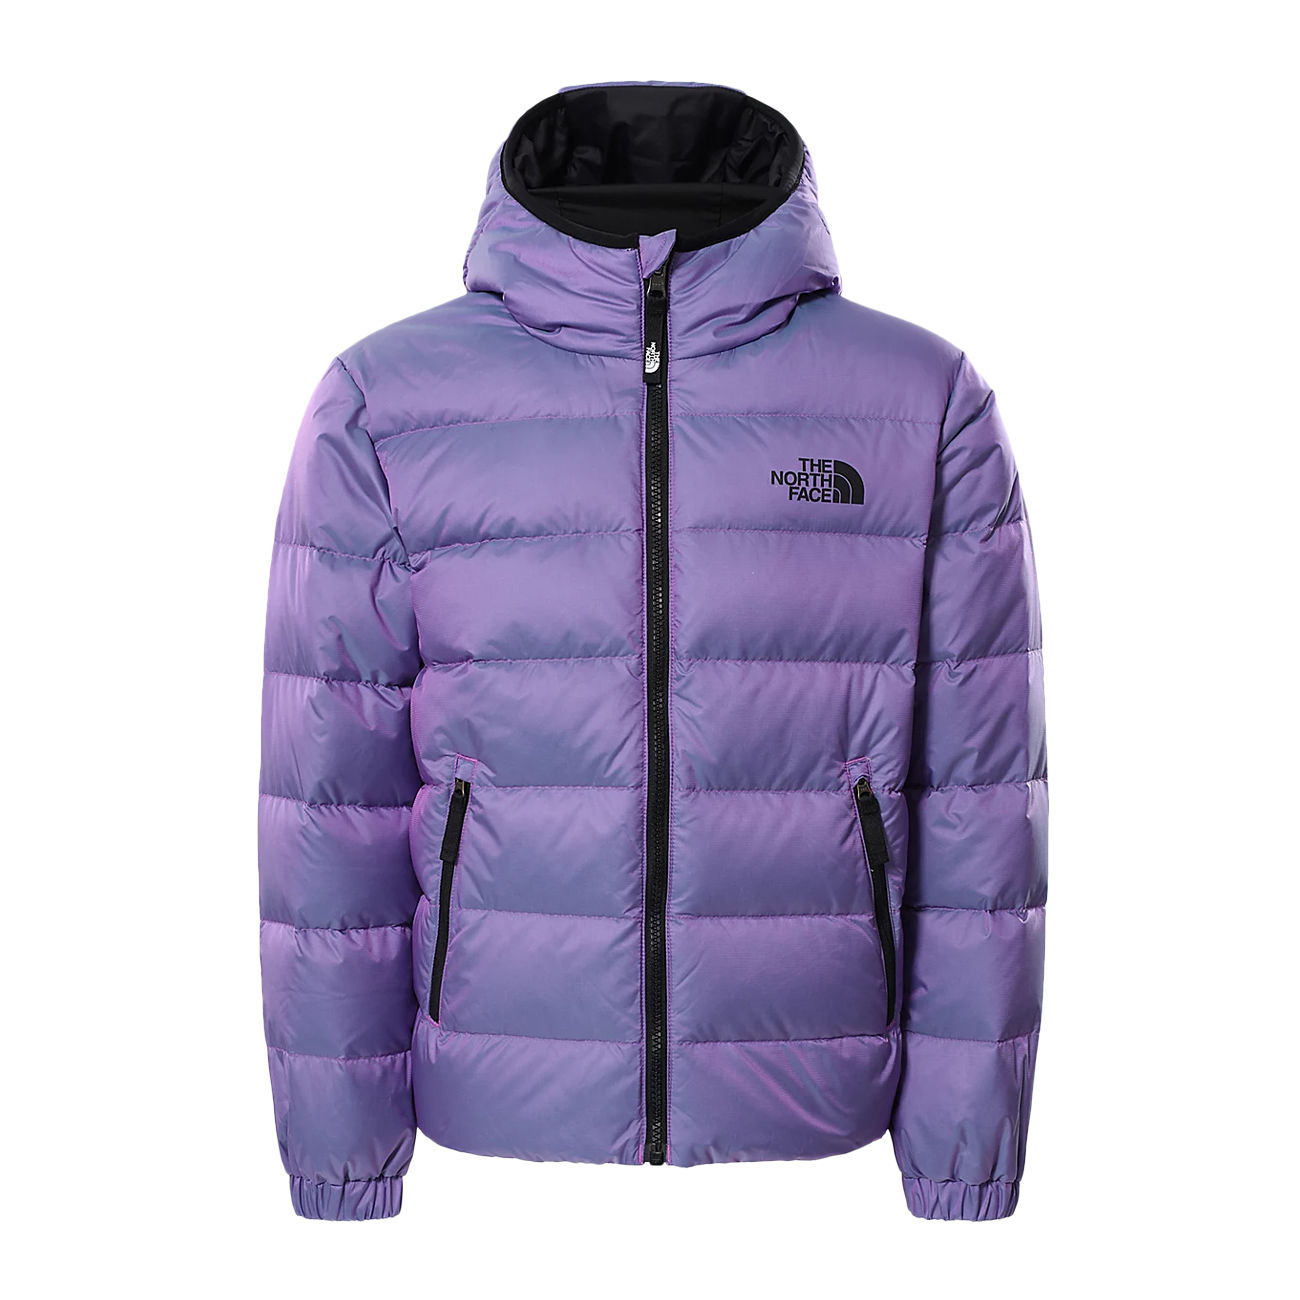 The North Face Girls Dealio City Jacket | Youth Down Jacket | WinterKids